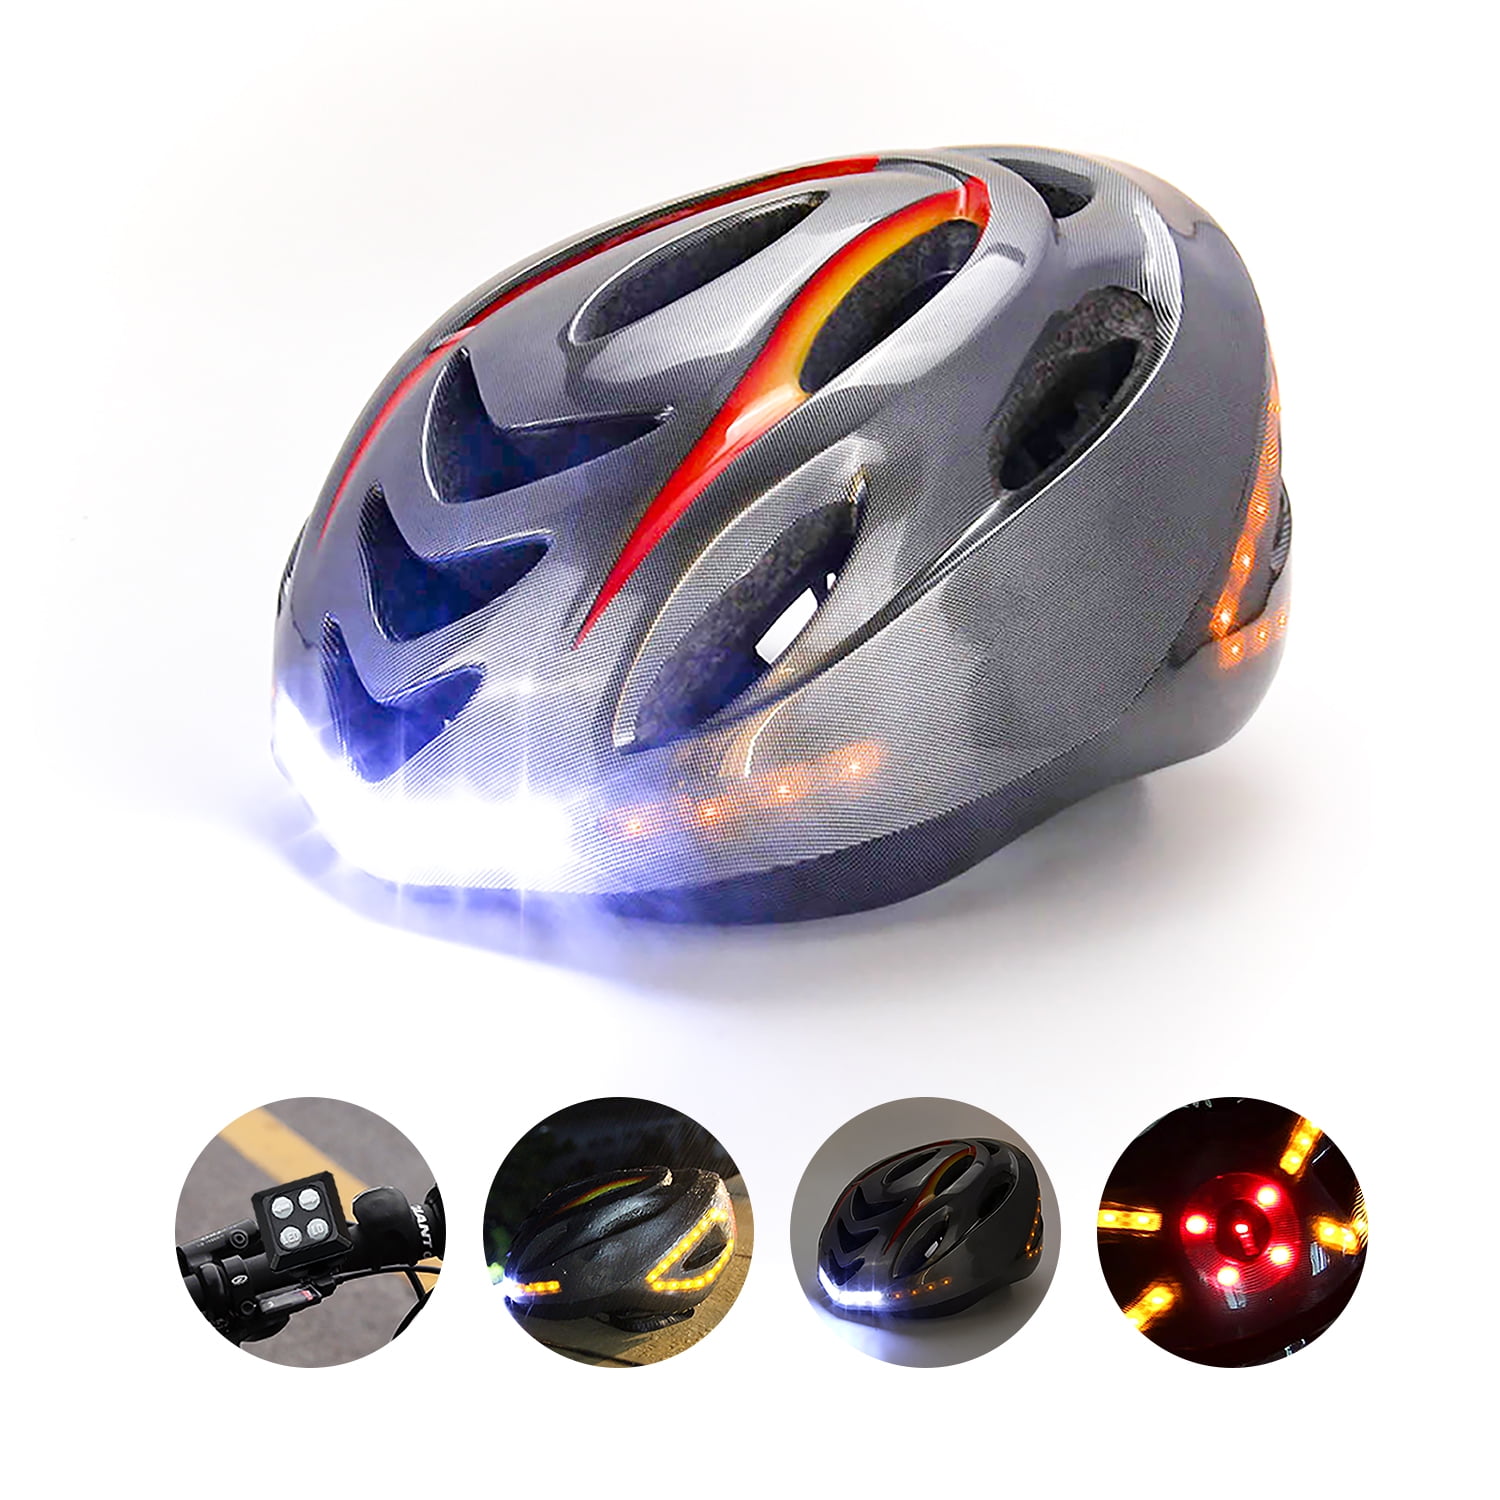 Details about   Cycling Helmet MTB Mountain Road Adjustable 300g In-Mold Time-Trial Free Glasses 